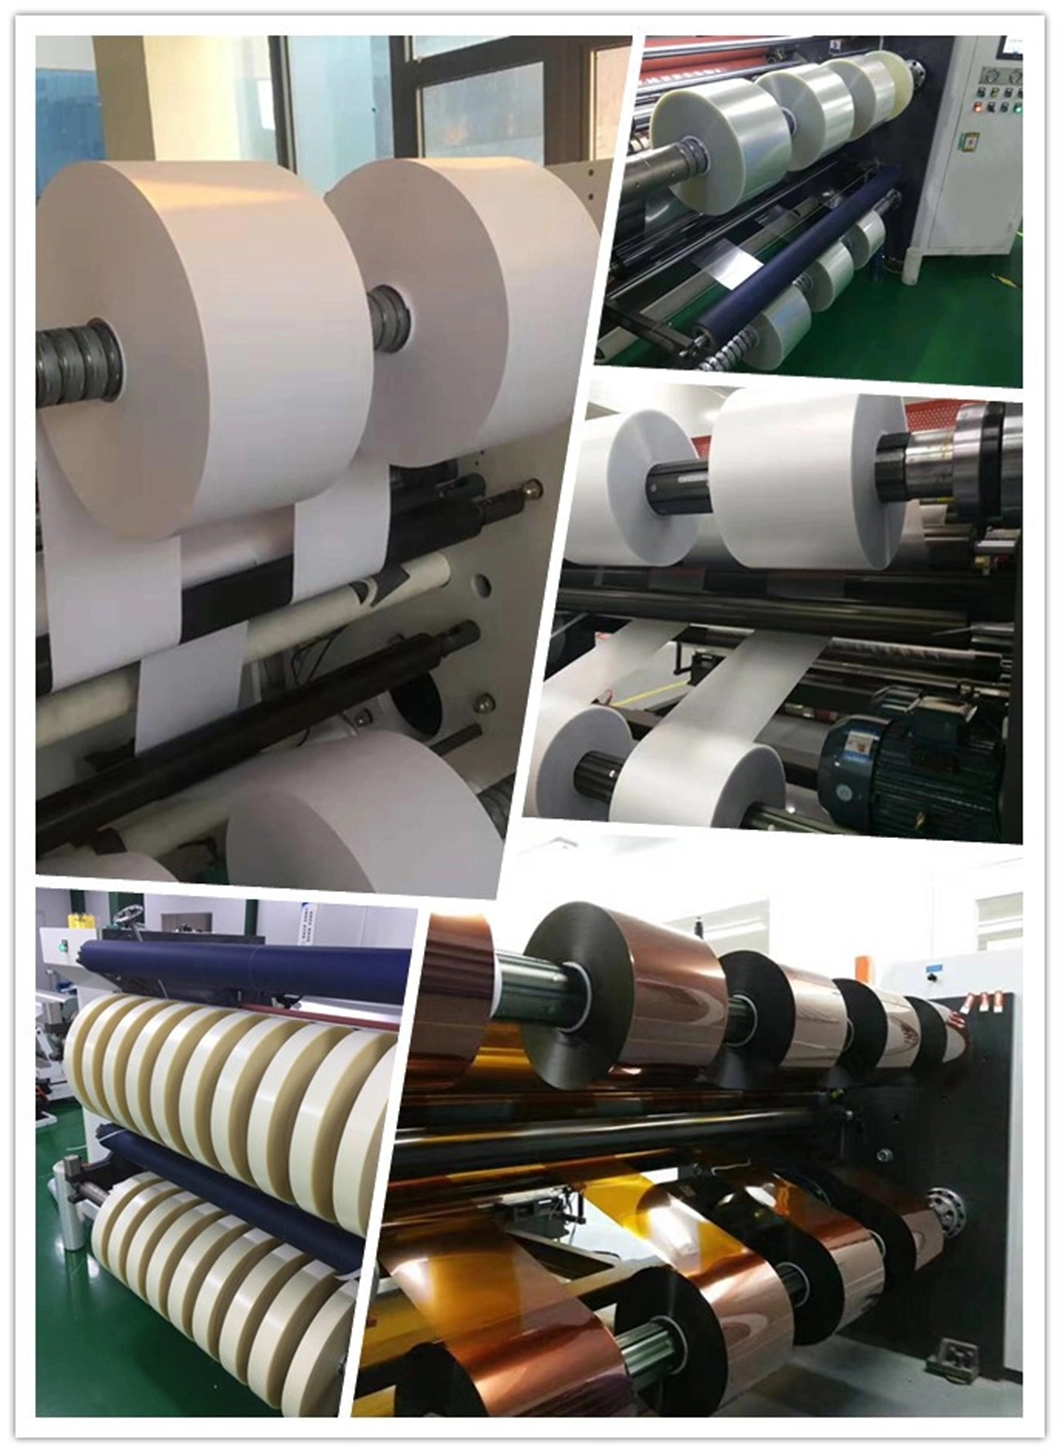 CNC Plccontrol High-Speed Slitting Rewinding Machine for Paper, Adhesive Label, Screen Protector Film, Self-Adhesive, Craft Paper, PVC Thick Film, Slicing